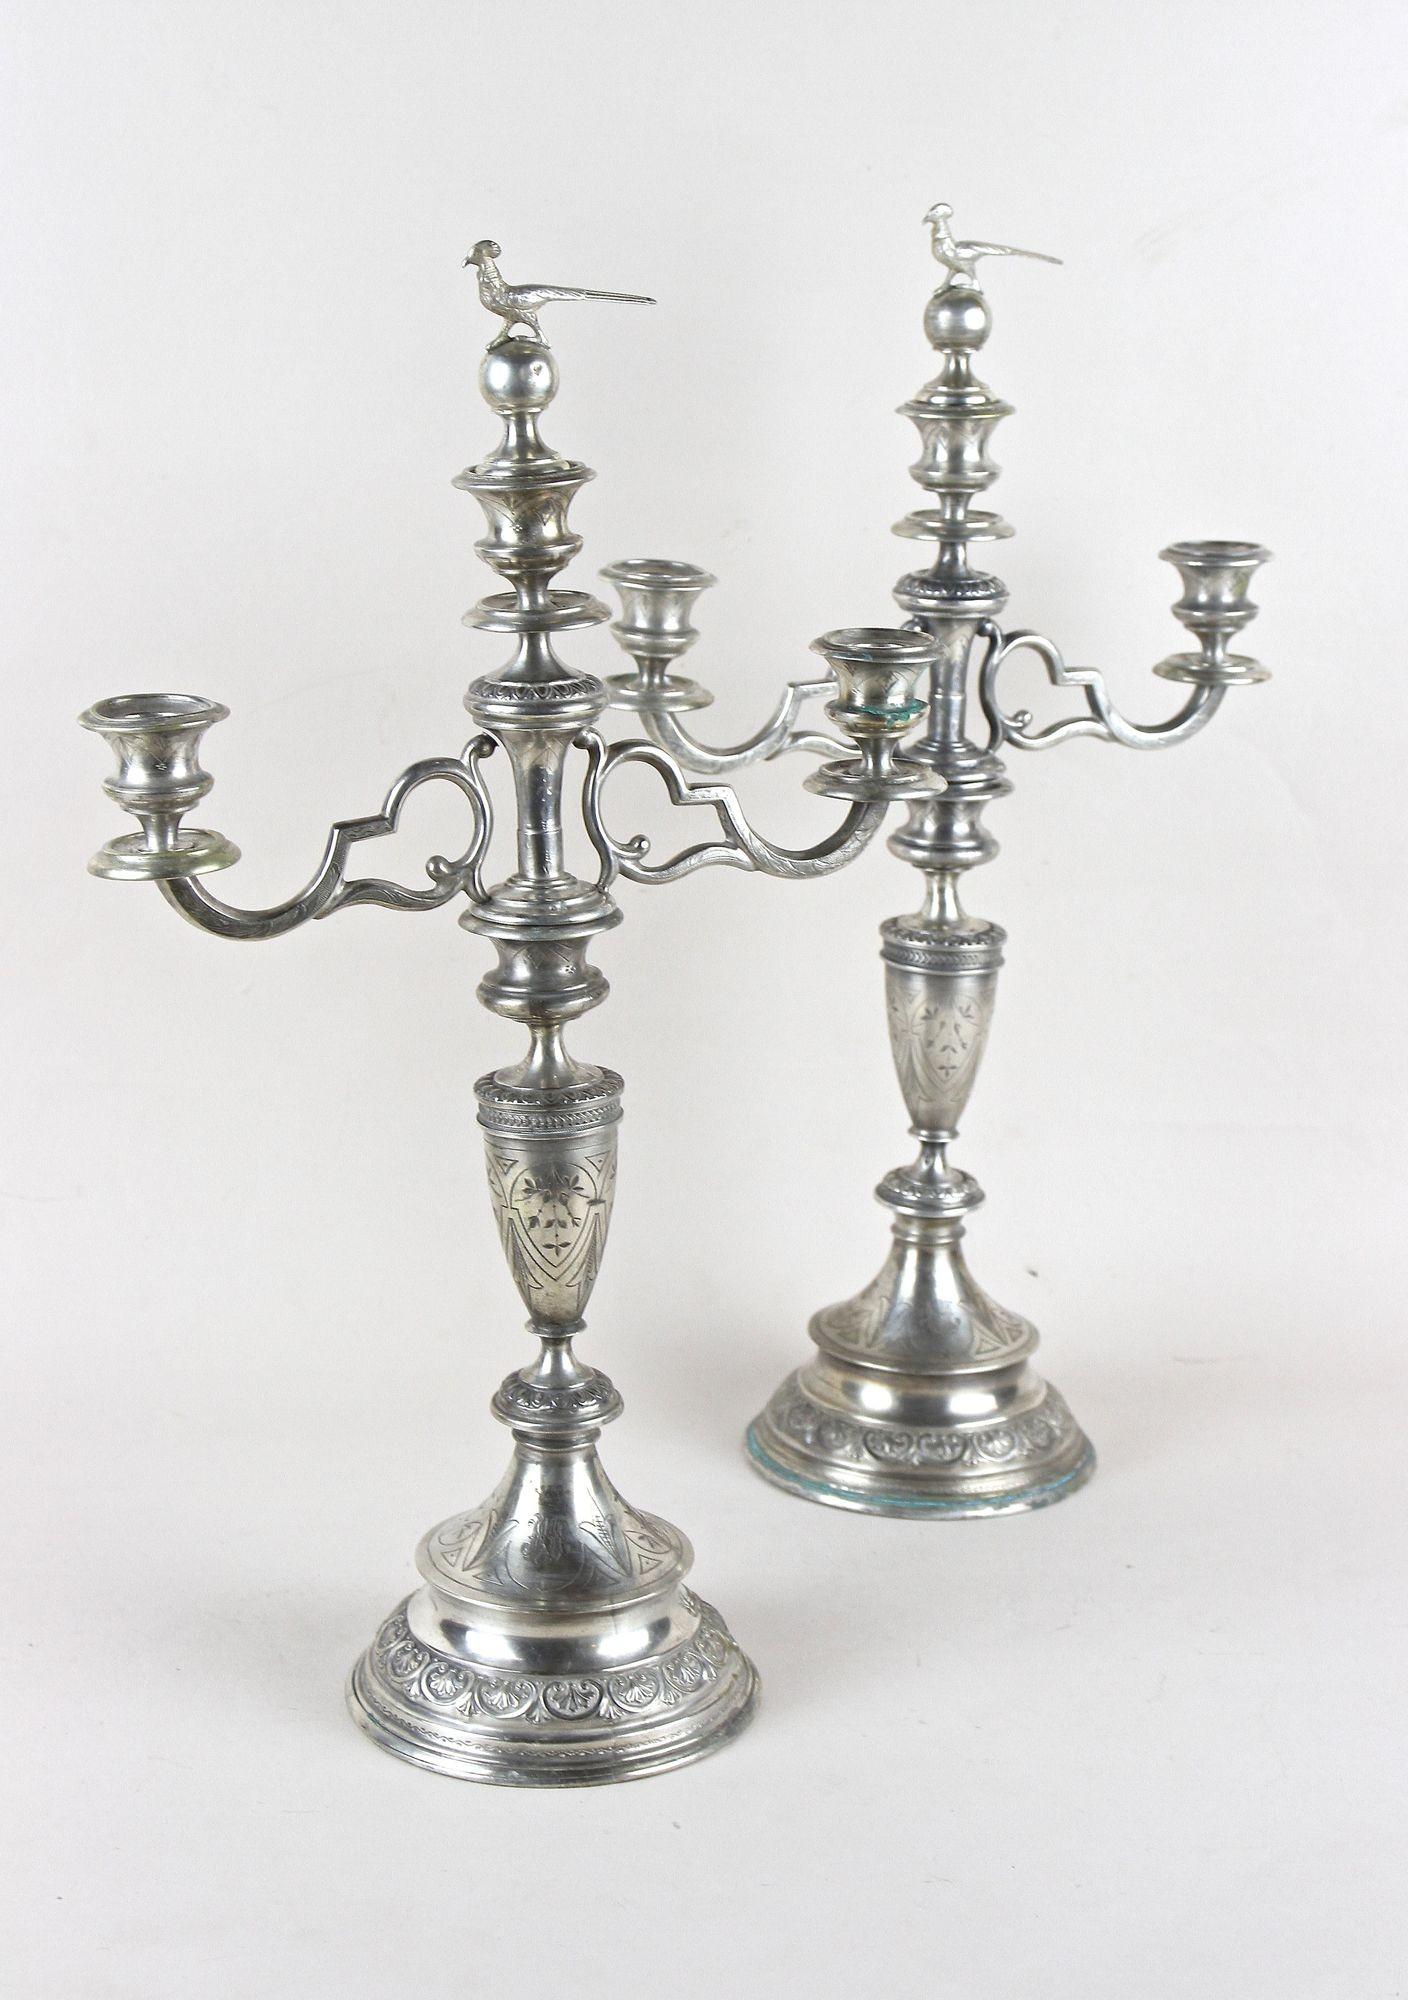 Very decorative pair of mid-19th century solid silver candelabras coming from the period around 1860 in Austria. Artfully designed with amazing looking small details, these large extraordinary silver candelabras were elaborately hand chased out of